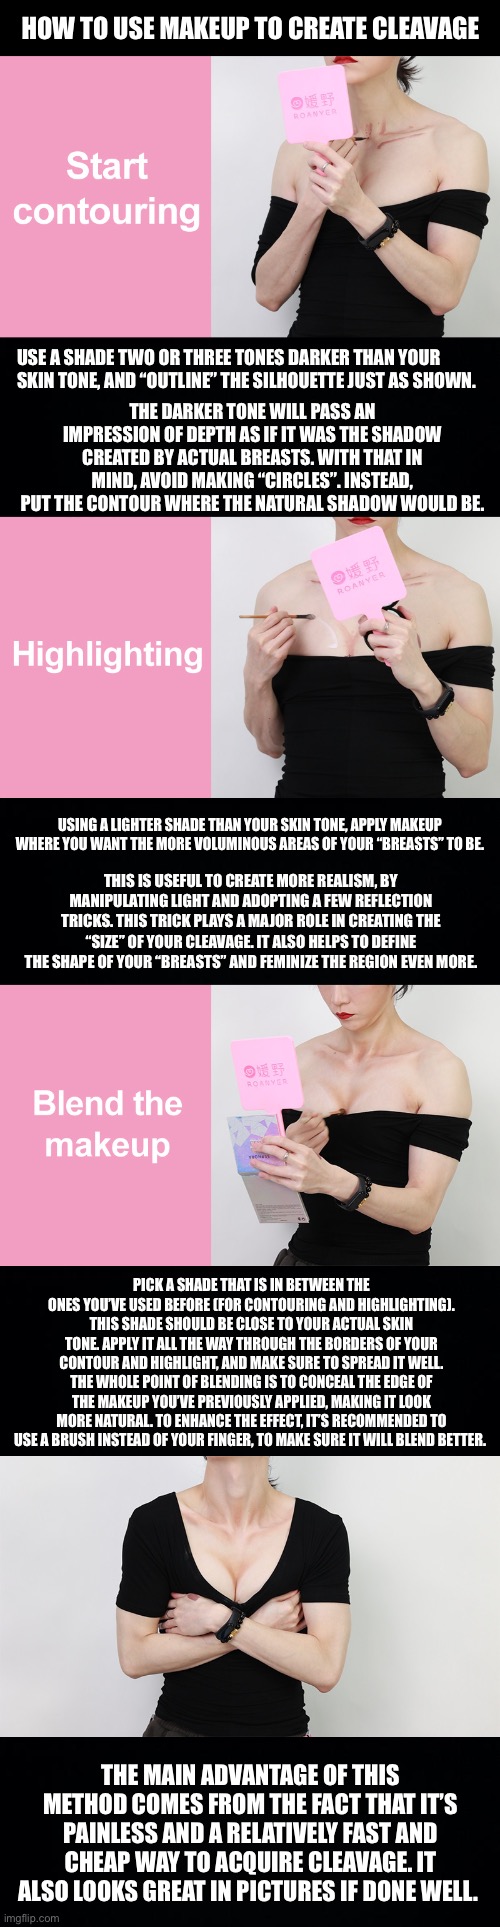 Using makeup to create cleavage | HOW TO USE MAKEUP TO CREATE CLEAVAGE; USE A SHADE TWO OR THREE TONES DARKER THAN YOUR SKIN TONE, AND “OUTLINE” THE SILHOUETTE JUST AS SHOWN. THE DARKER TONE WILL PASS AN IMPRESSION OF DEPTH AS IF IT WAS THE SHADOW CREATED BY ACTUAL BREASTS. WITH THAT IN MIND, AVOID MAKING “CIRCLES”. INSTEAD, PUT THE CONTOUR WHERE THE NATURAL SHADOW WOULD BE. USING A LIGHTER SHADE THAN YOUR SKIN TONE, APPLY MAKEUP WHERE YOU WANT THE MORE VOLUMINOUS AREAS OF YOUR “BREASTS” TO BE. THIS IS USEFUL TO CREATE MORE REALISM, BY MANIPULATING LIGHT AND ADOPTING A FEW REFLECTION TRICKS. THIS TRICK PLAYS A MAJOR ROLE IN CREATING THE “SIZE” OF YOUR CLEAVAGE. IT ALSO HELPS TO DEFINE THE SHAPE OF YOUR “BREASTS” AND FEMINIZE THE REGION EVEN MORE. PICK A SHADE THAT IS IN BETWEEN THE ONES YOU’VE USED BEFORE (FOR CONTOURING AND HIGHLIGHTING). THIS SHADE SHOULD BE CLOSE TO YOUR ACTUAL SKIN TONE. APPLY IT ALL THE WAY THROUGH THE BORDERS OF YOUR CONTOUR AND HIGHLIGHT, AND MAKE SURE TO SPREAD IT WELL. THE WHOLE POINT OF BLENDING IS TO CONCEAL THE EDGE OF THE MAKEUP YOU’VE PREVIOUSLY APPLIED, MAKING IT LOOK MORE NATURAL. TO ENHANCE THE EFFECT, IT’S RECOMMENDED TO USE A BRUSH INSTEAD OF YOUR FINGER, TO MAKE SURE IT WILL BLEND BETTER. THE MAIN ADVANTAGE OF THIS METHOD COMES FROM THE FACT THAT IT’S PAINLESS AND A RELATIVELY FAST AND CHEAP WAY TO ACQUIRE CLEAVAGE. IT ALSO LOOKS GREAT IN PICTURES IF DONE WELL. | image tagged in crossdresser,crossdressing,femboys,drag queen,makeup,makeup techniques | made w/ Imgflip meme maker